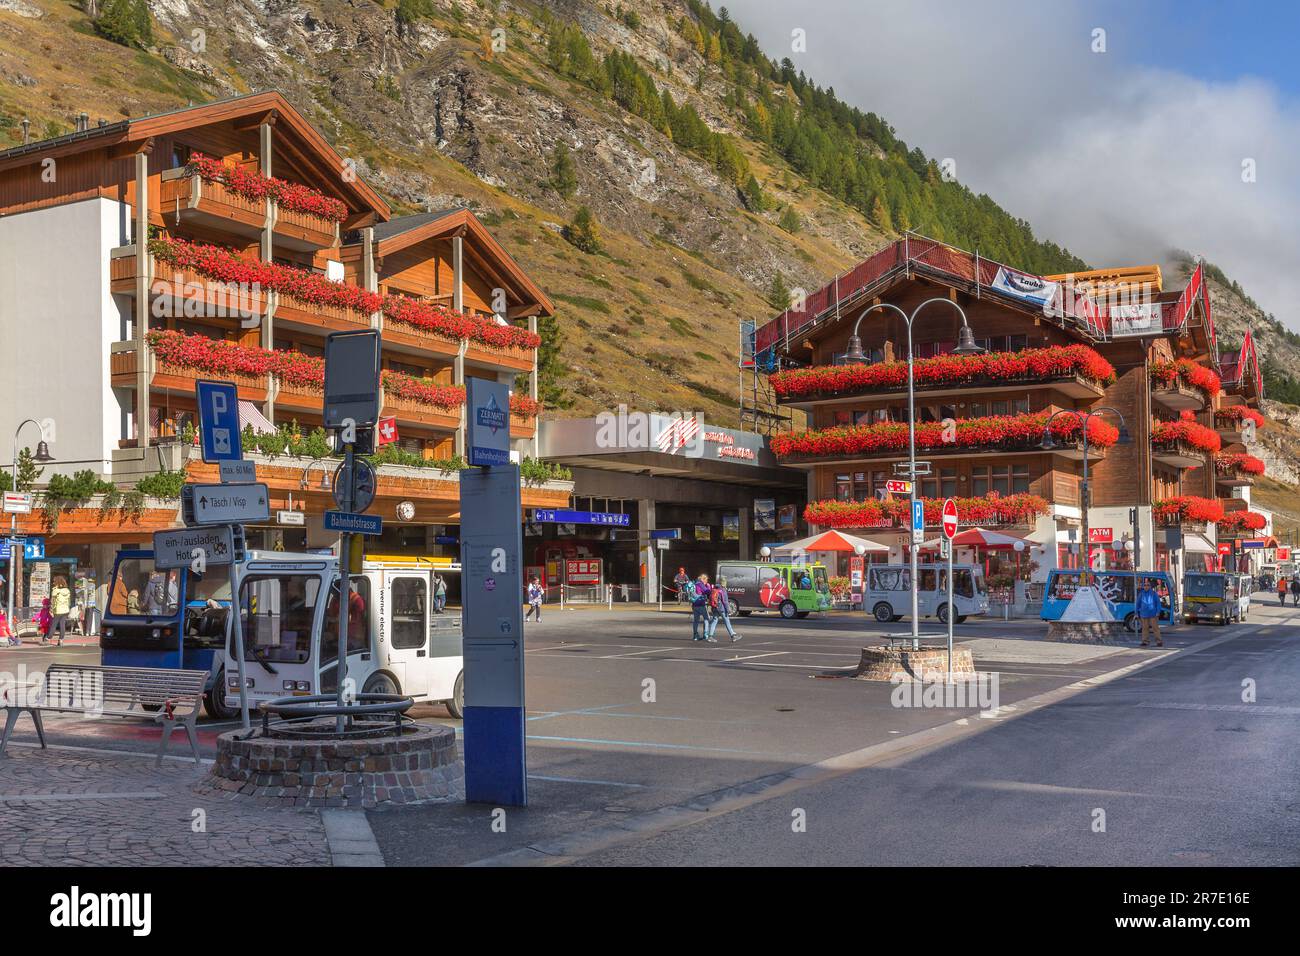 Zermatt, Switzerland - October 7, 2019: Town center street and railway station square view in famous swiss ski resort, colorful traditional houses Stock Photo